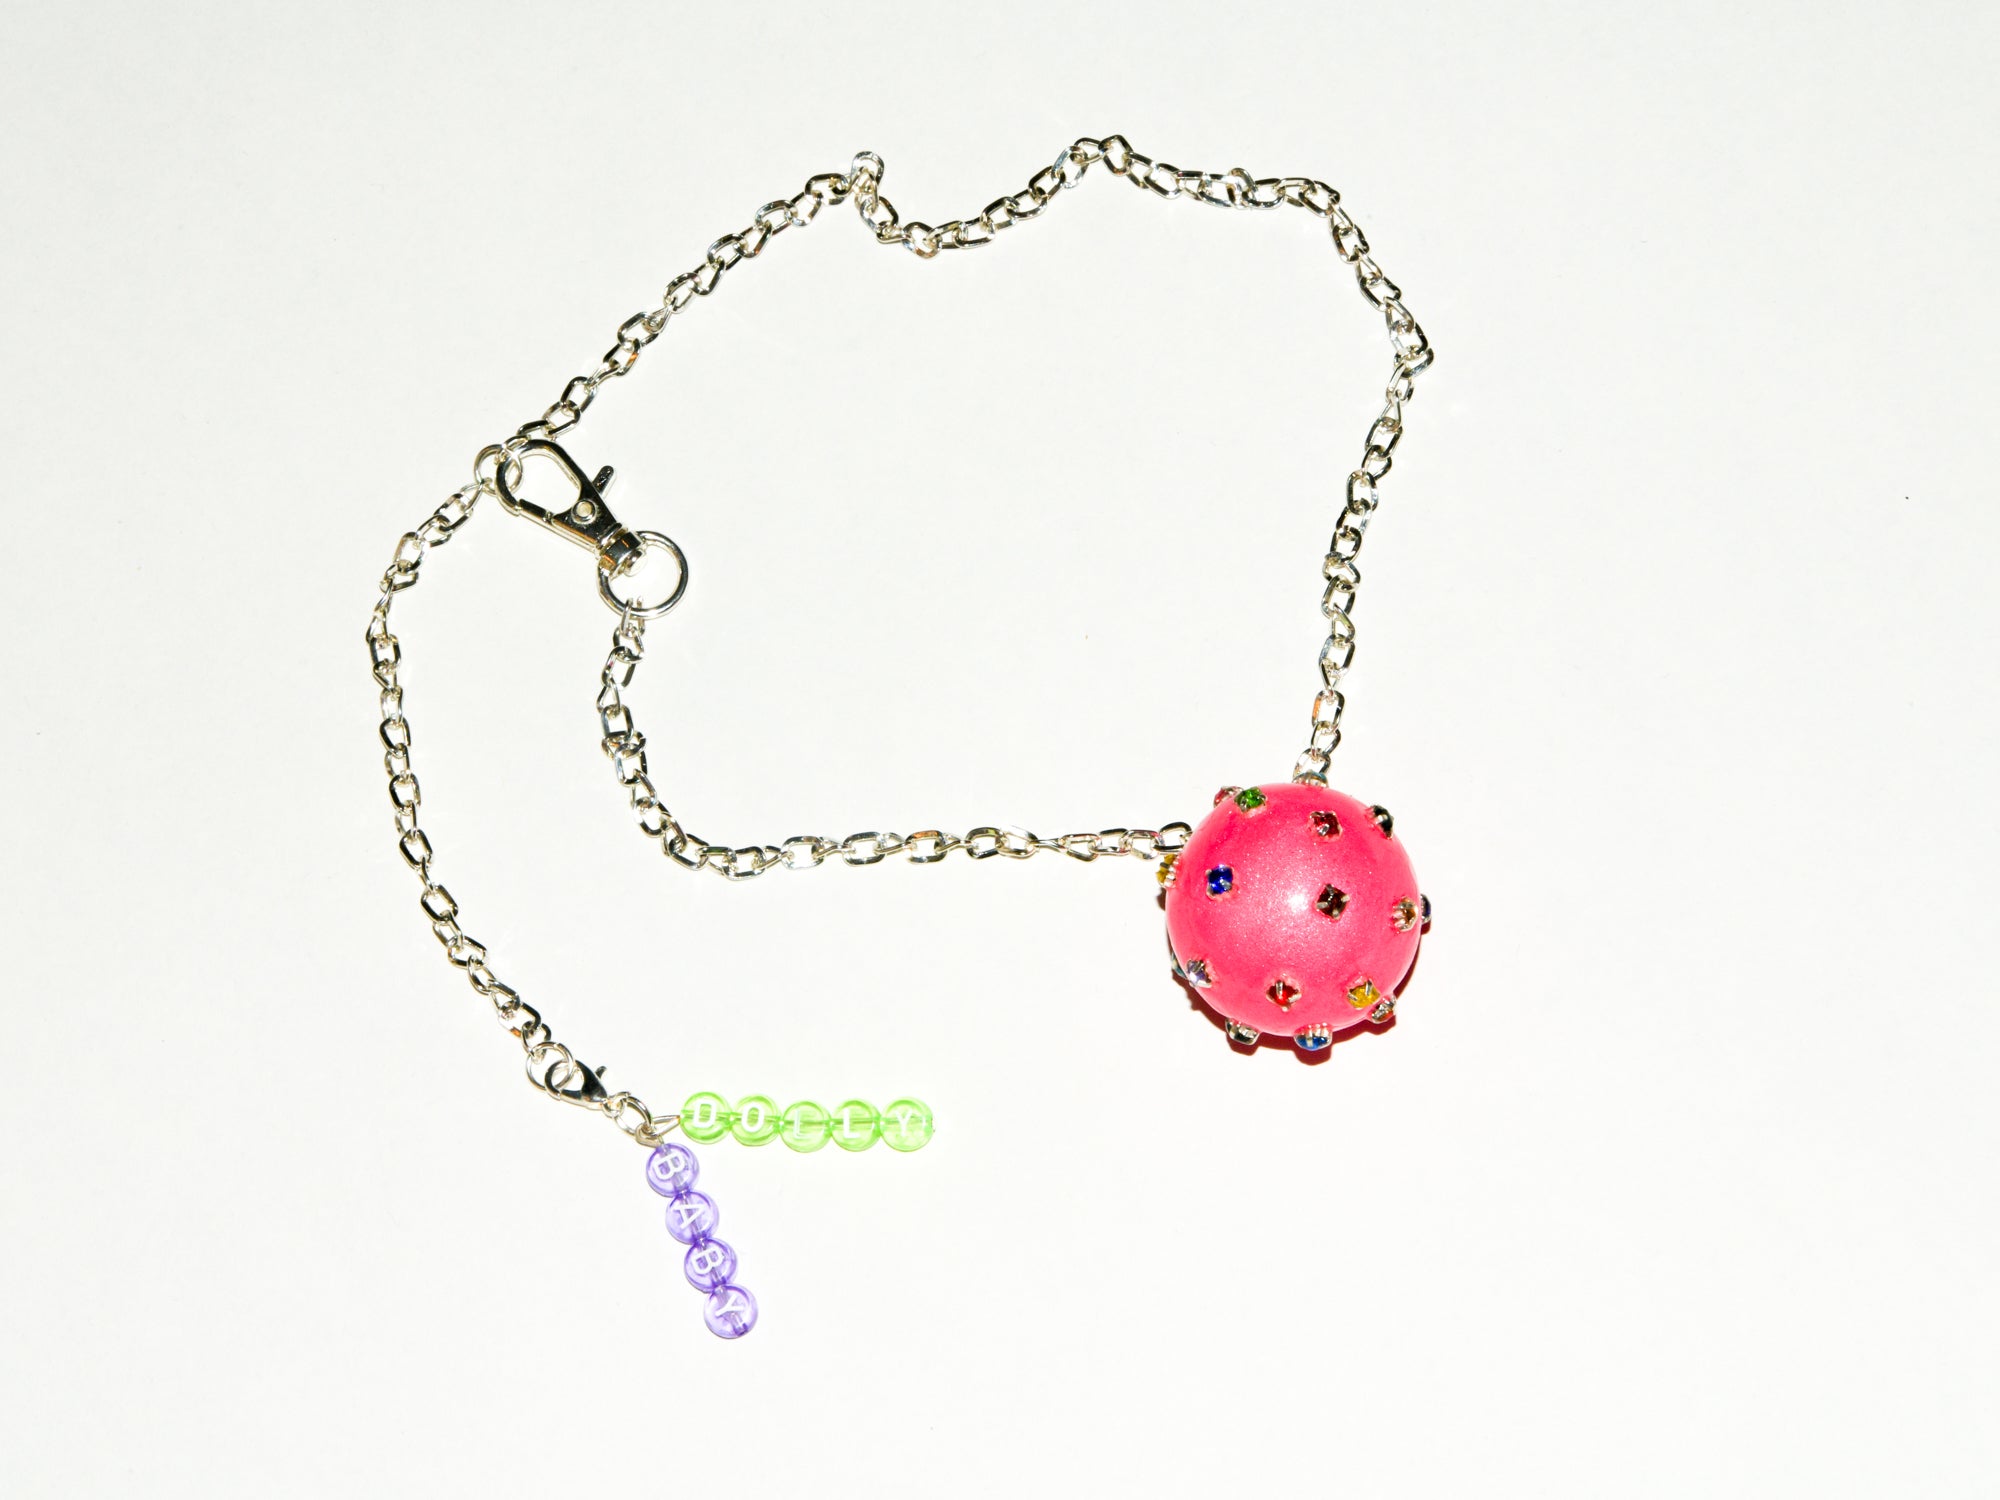 Disco Ball Choker Necklace in Hot Pink